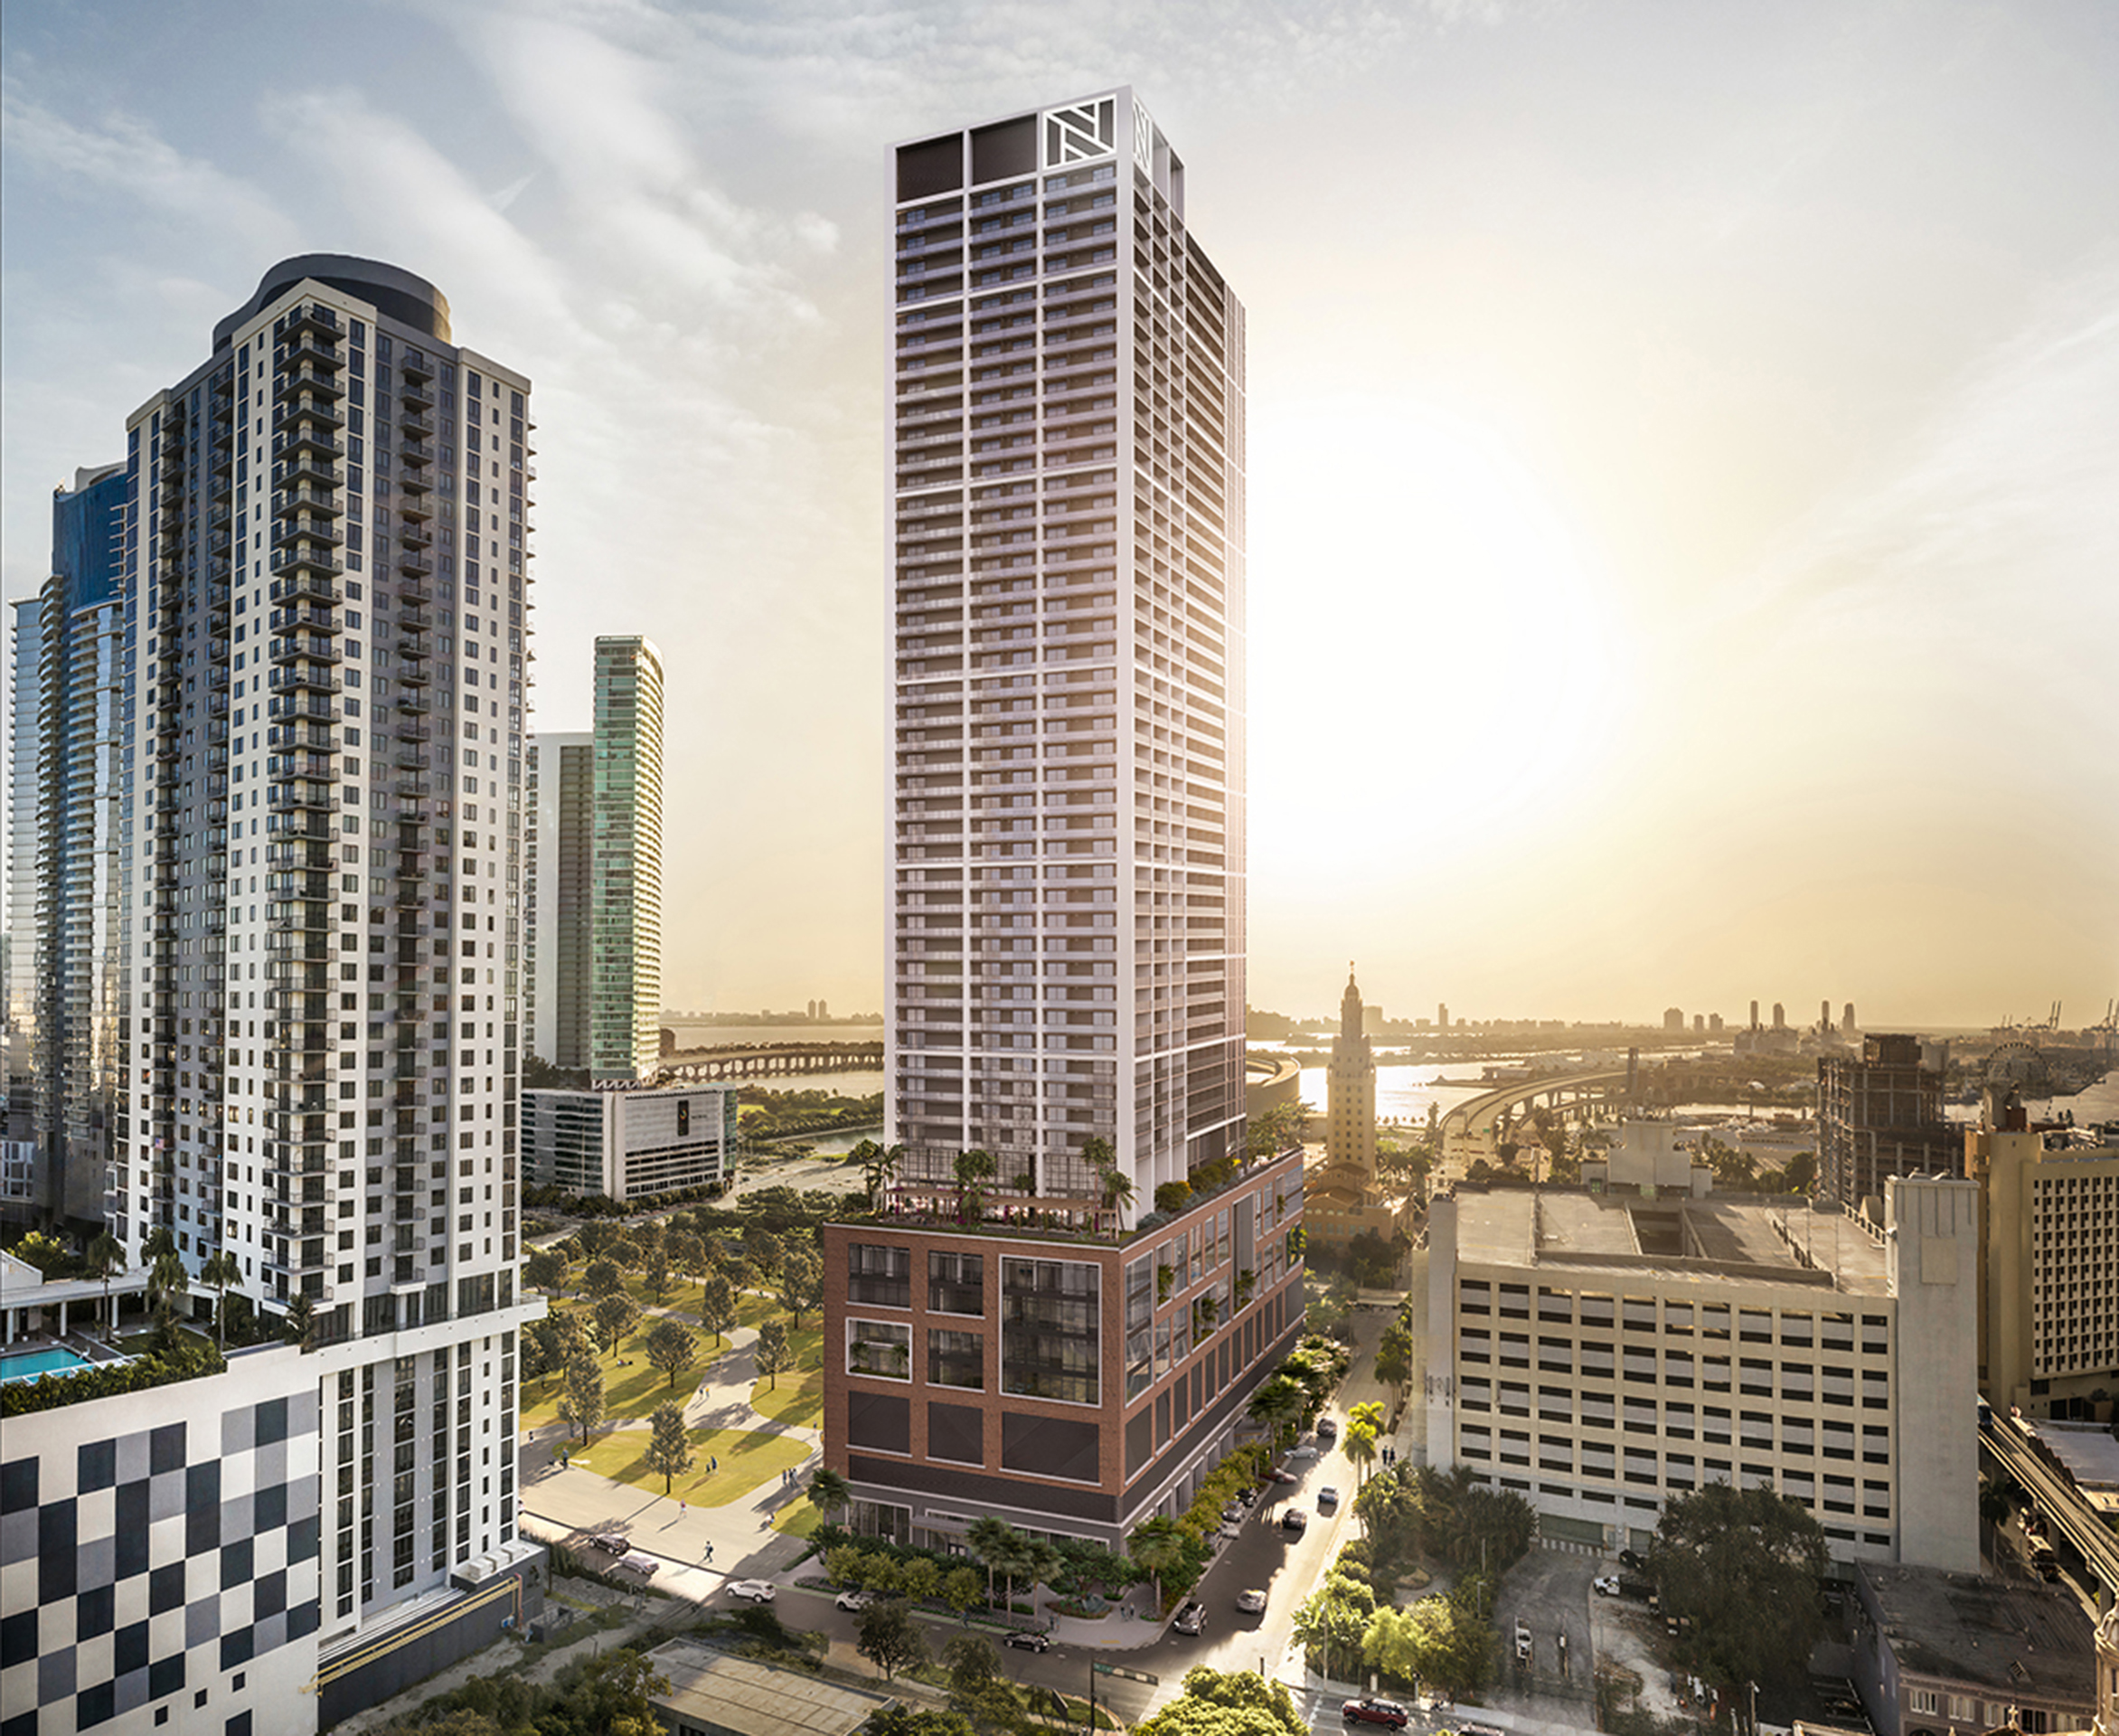 Galbut Family Commences Sales of Gale Condo-Hotel Units in the Heart of Downtown Miami